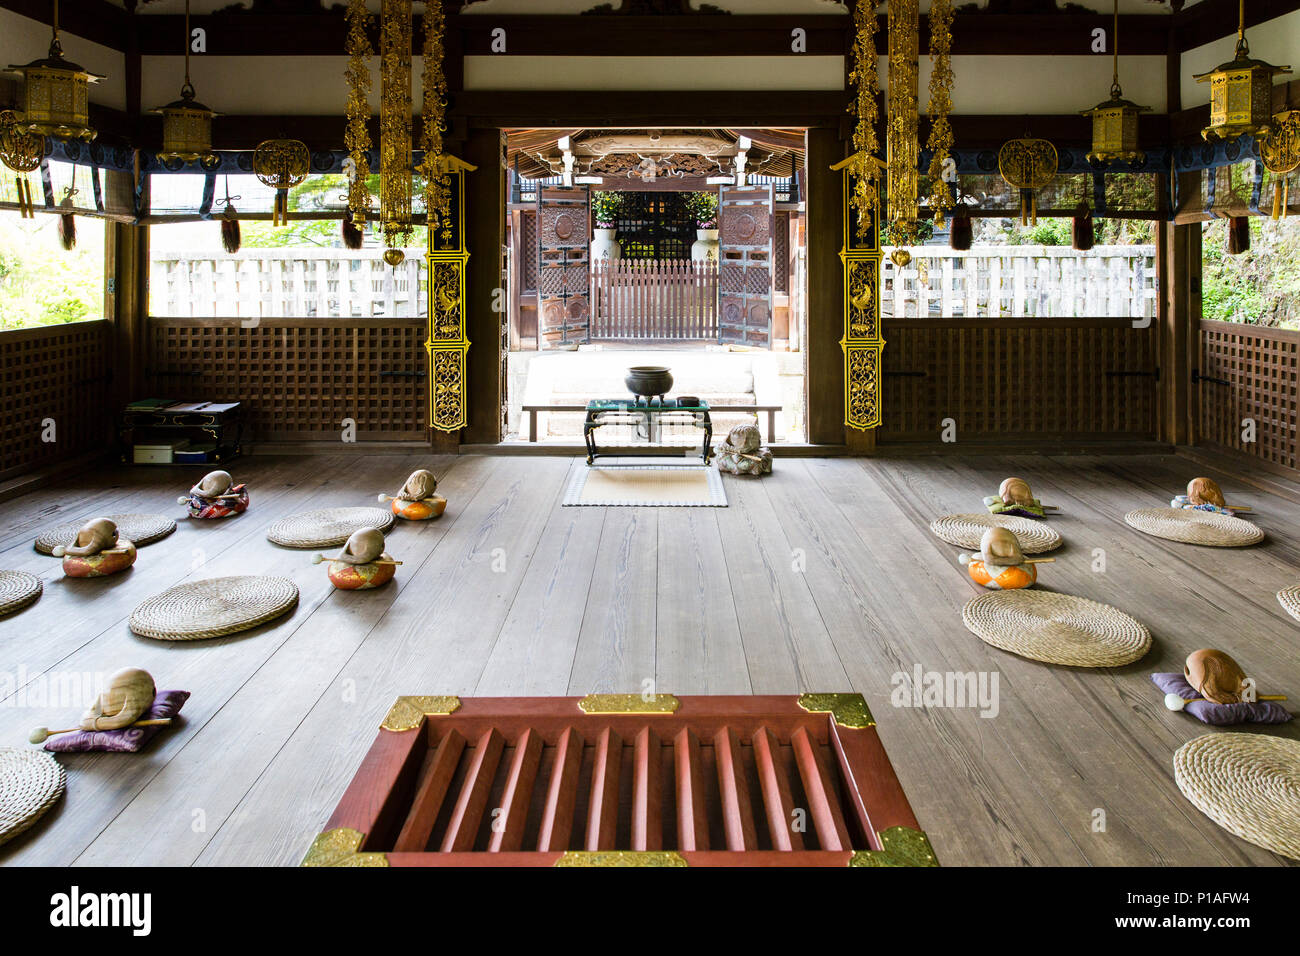 Music Hall of the Mausoleum in the Grounds of Chion-in Temple, Kyoto, Japan. Stock Photo